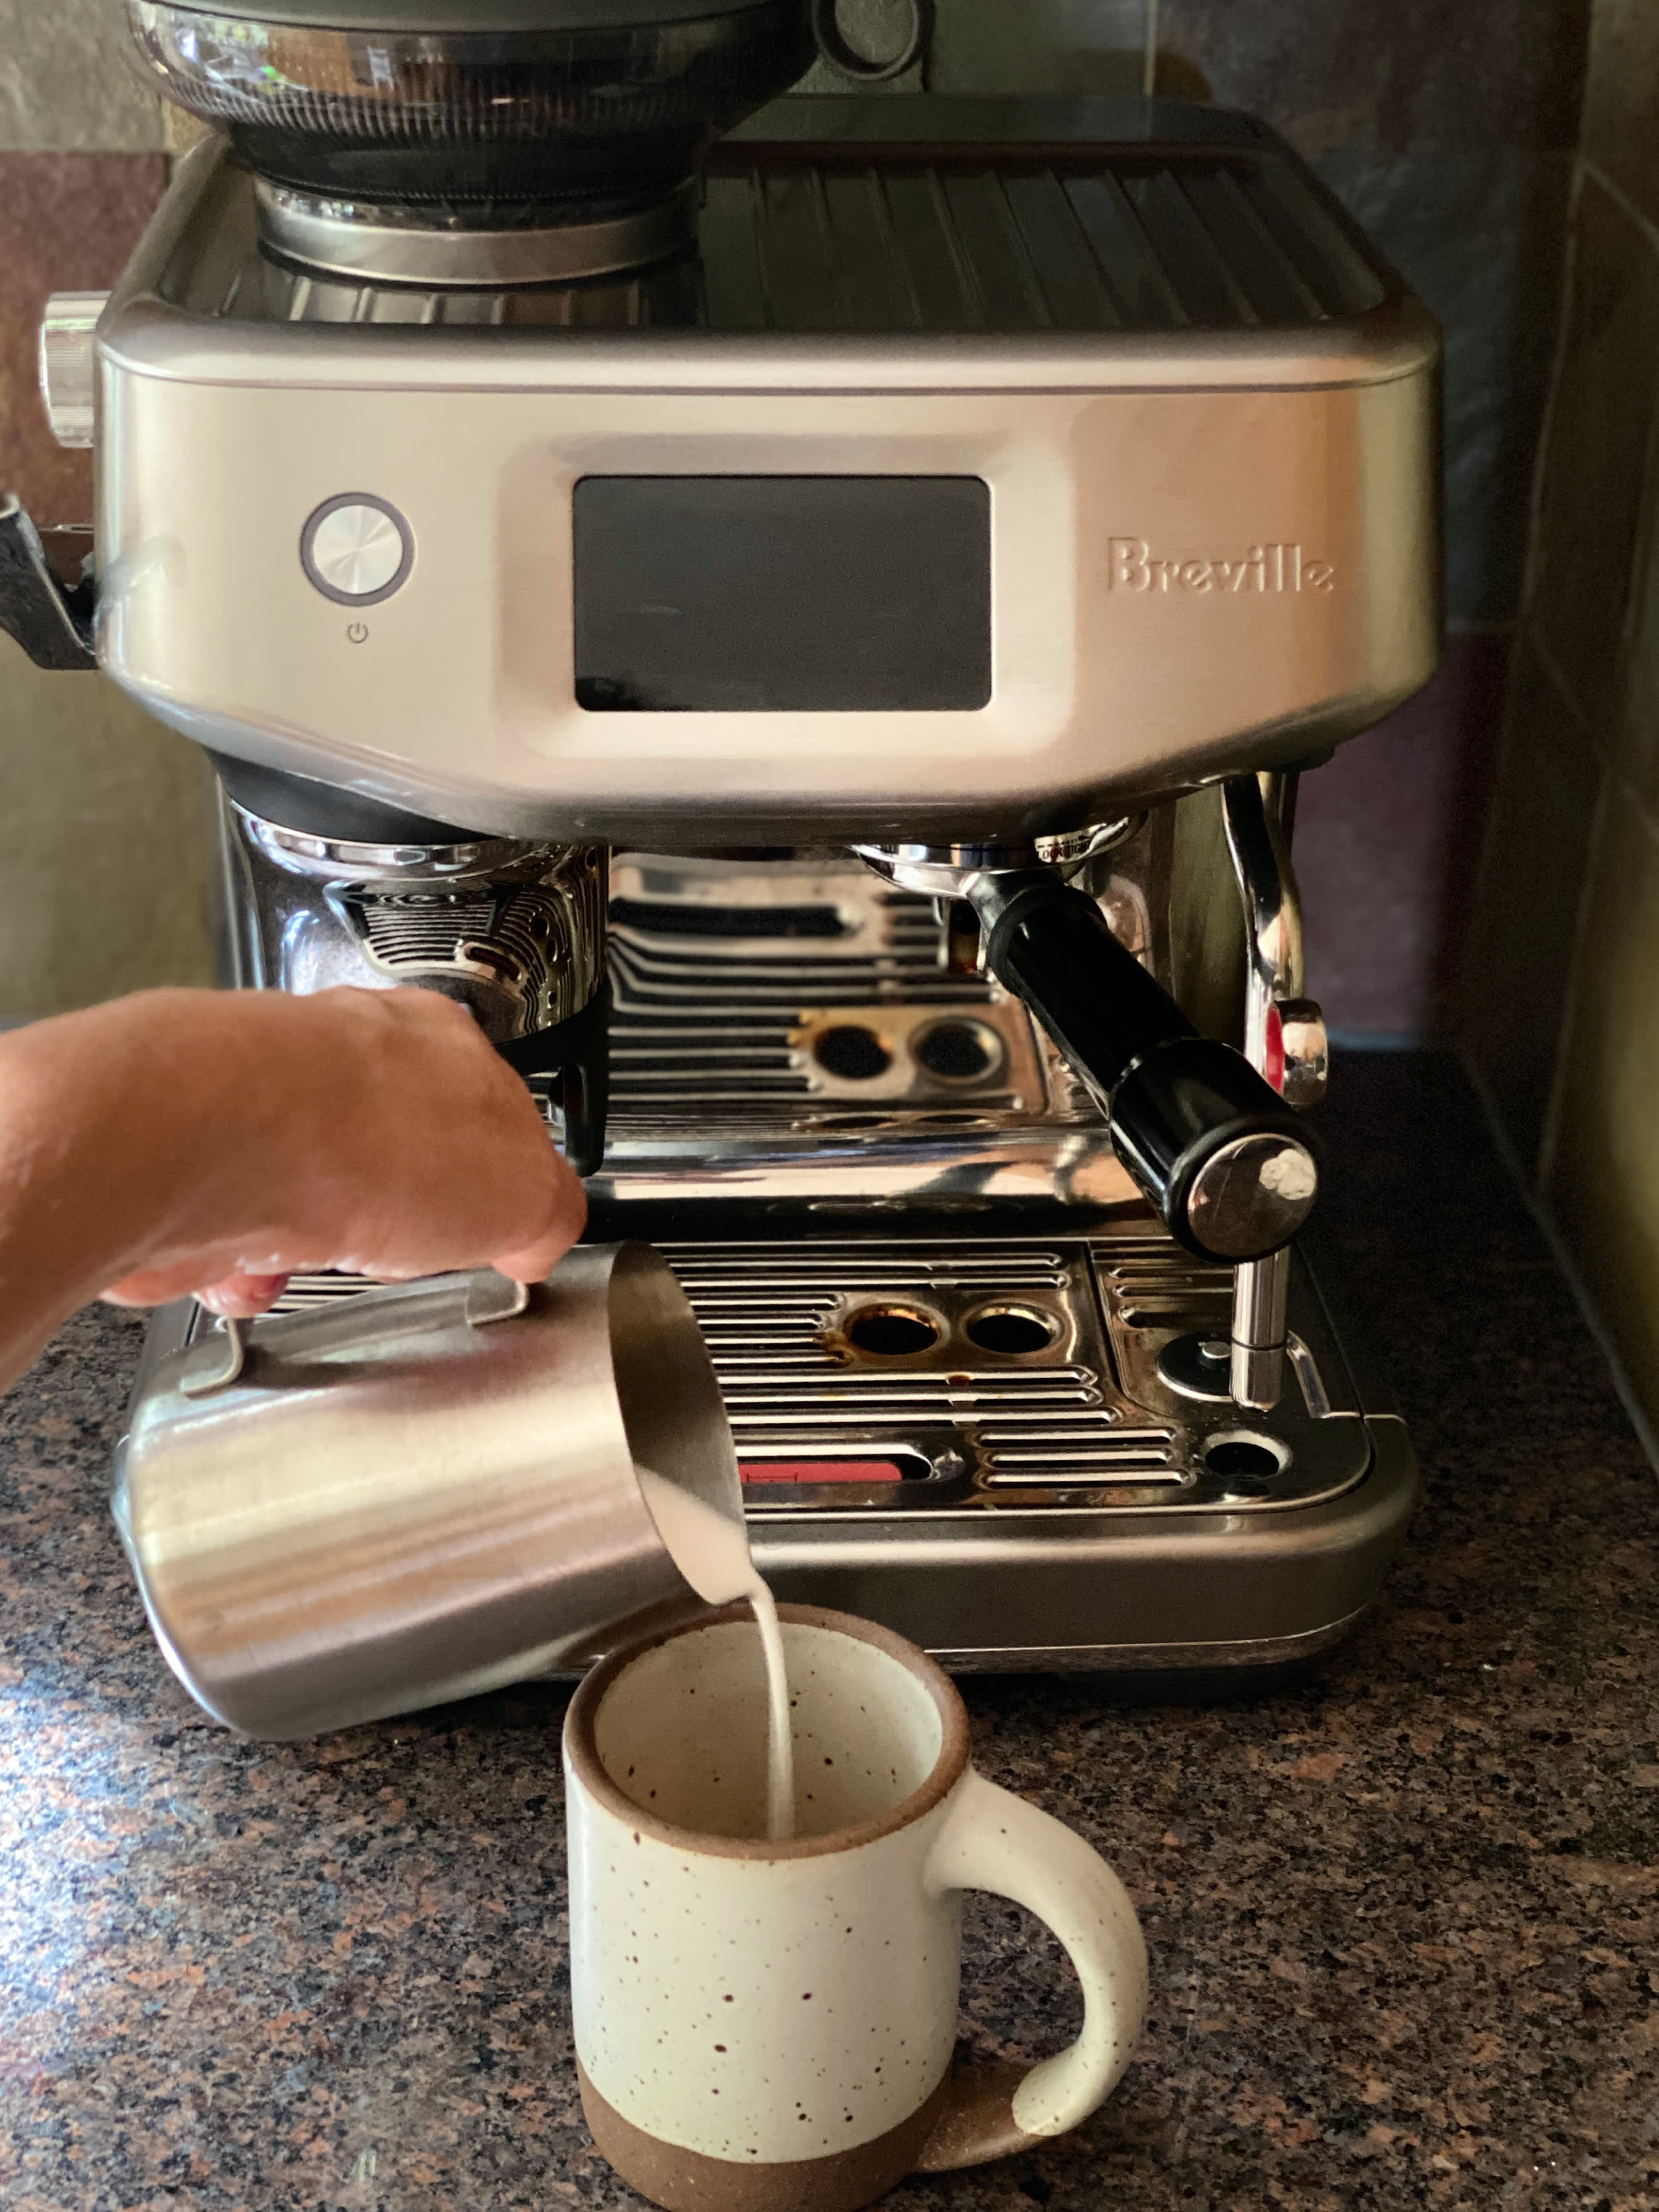 Sage (Breville) Barista Touch Impress Review. The Bean to Cup / Super Auto  Killer? 